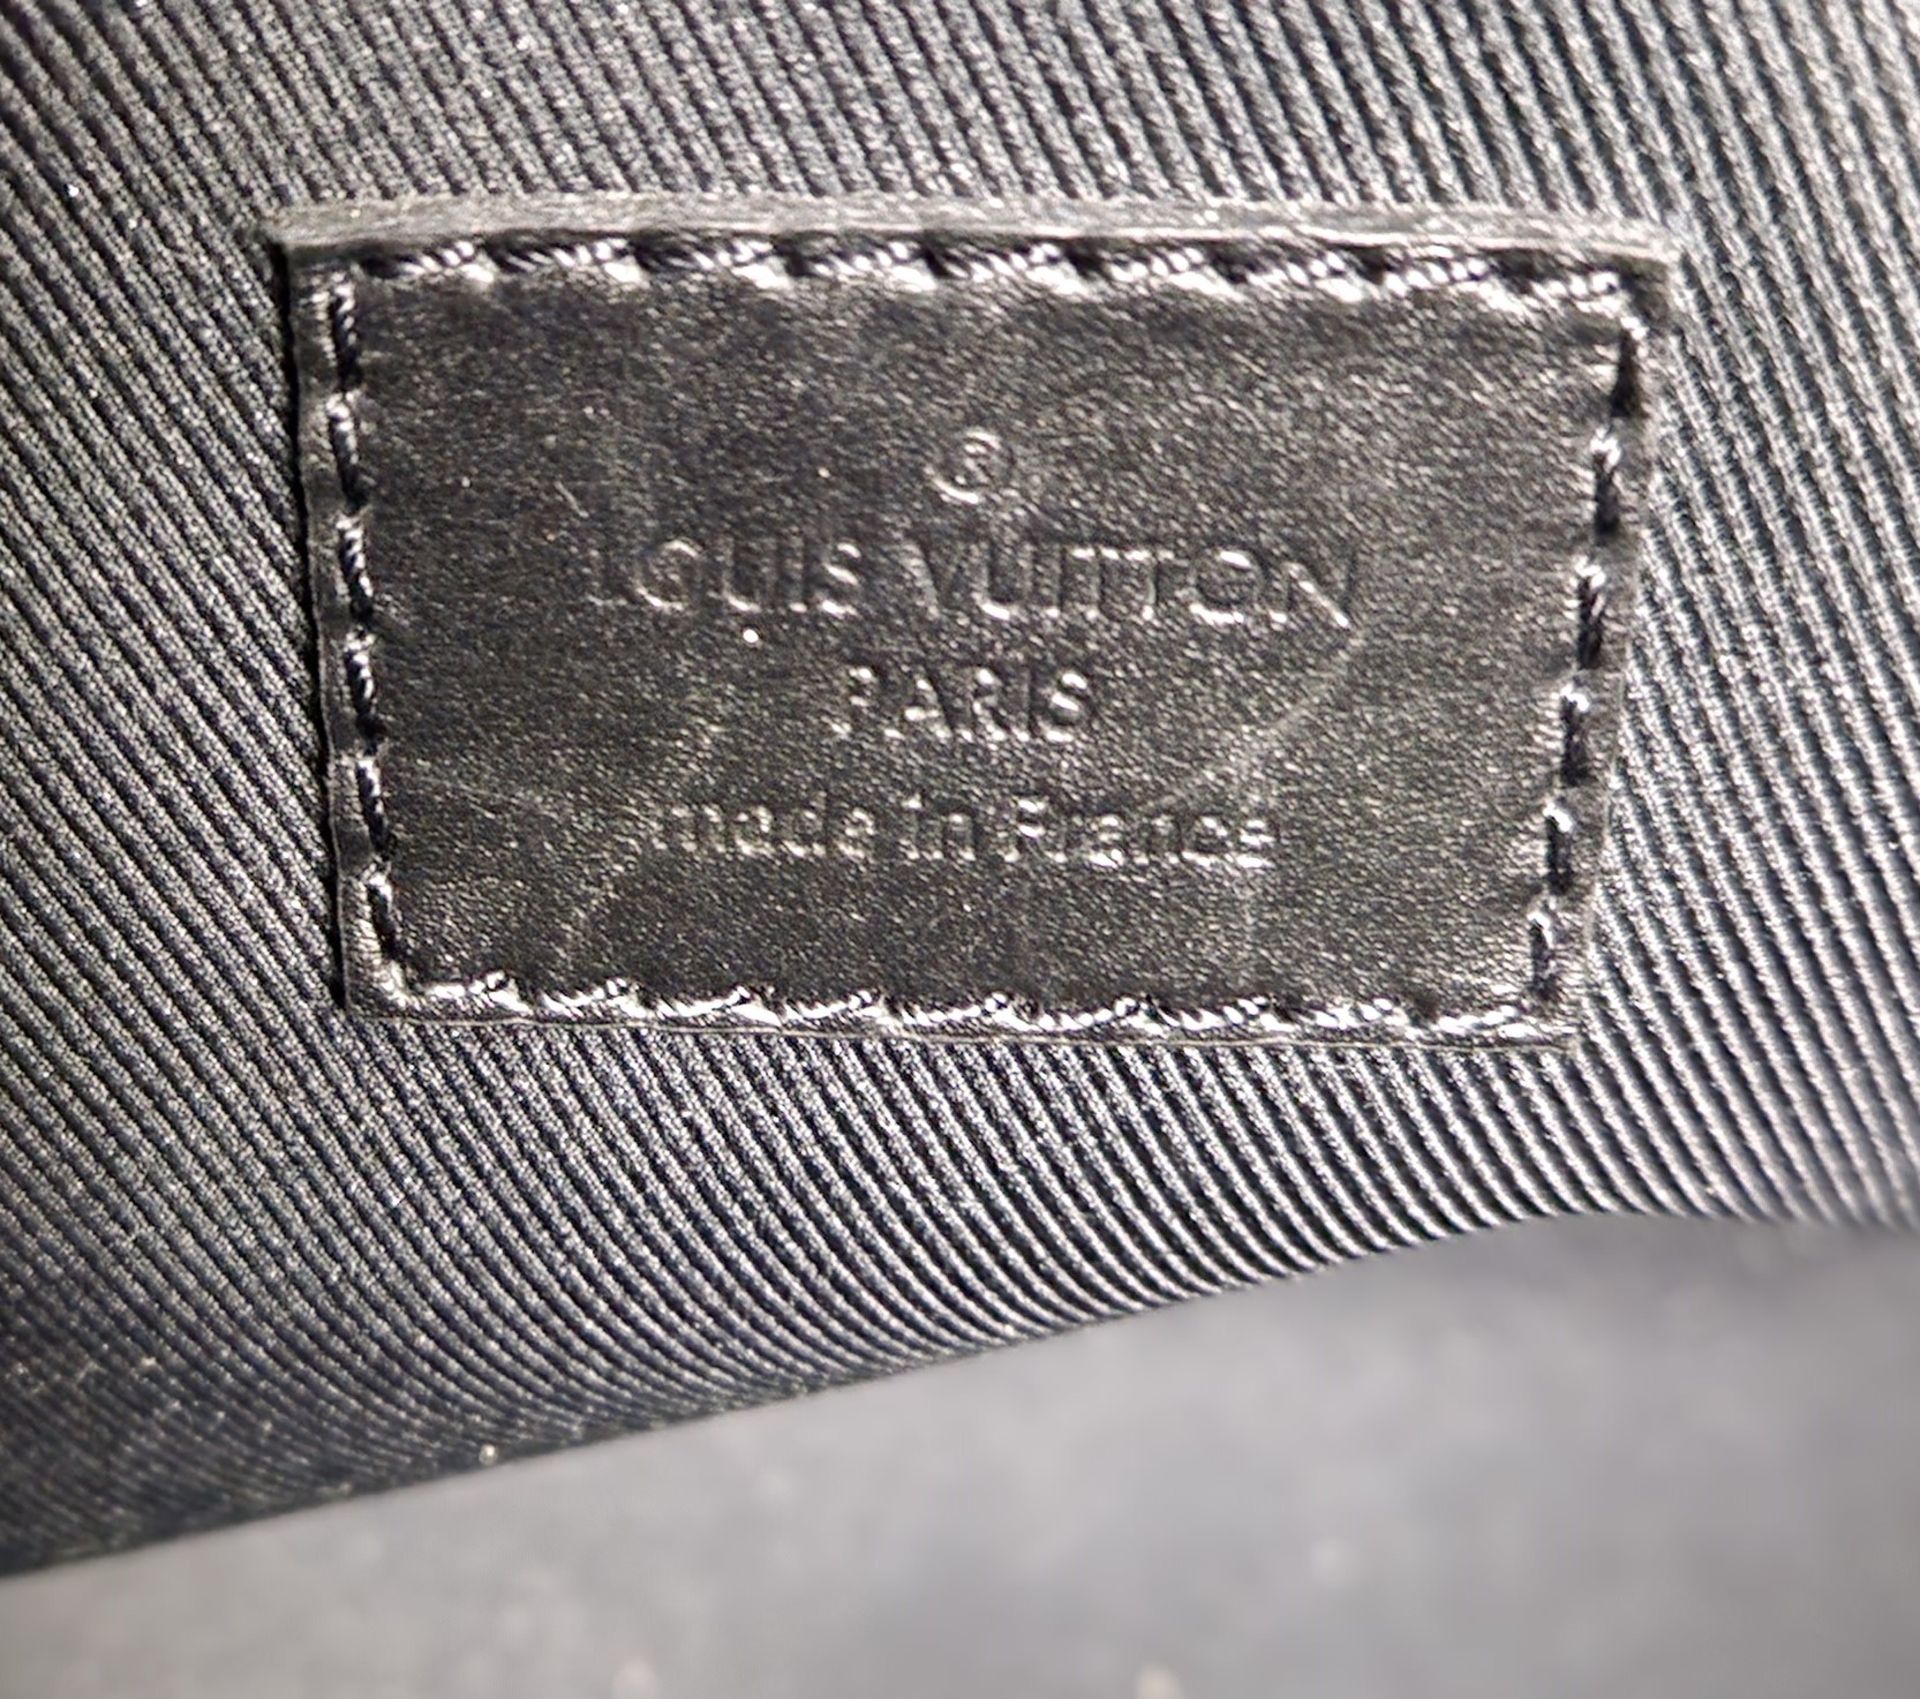 A LOUIS VUITTON Black Taurillon Cowhide Leather Soft Trunk Bag with Monogram Embossed Leather, - Image 2 of 3